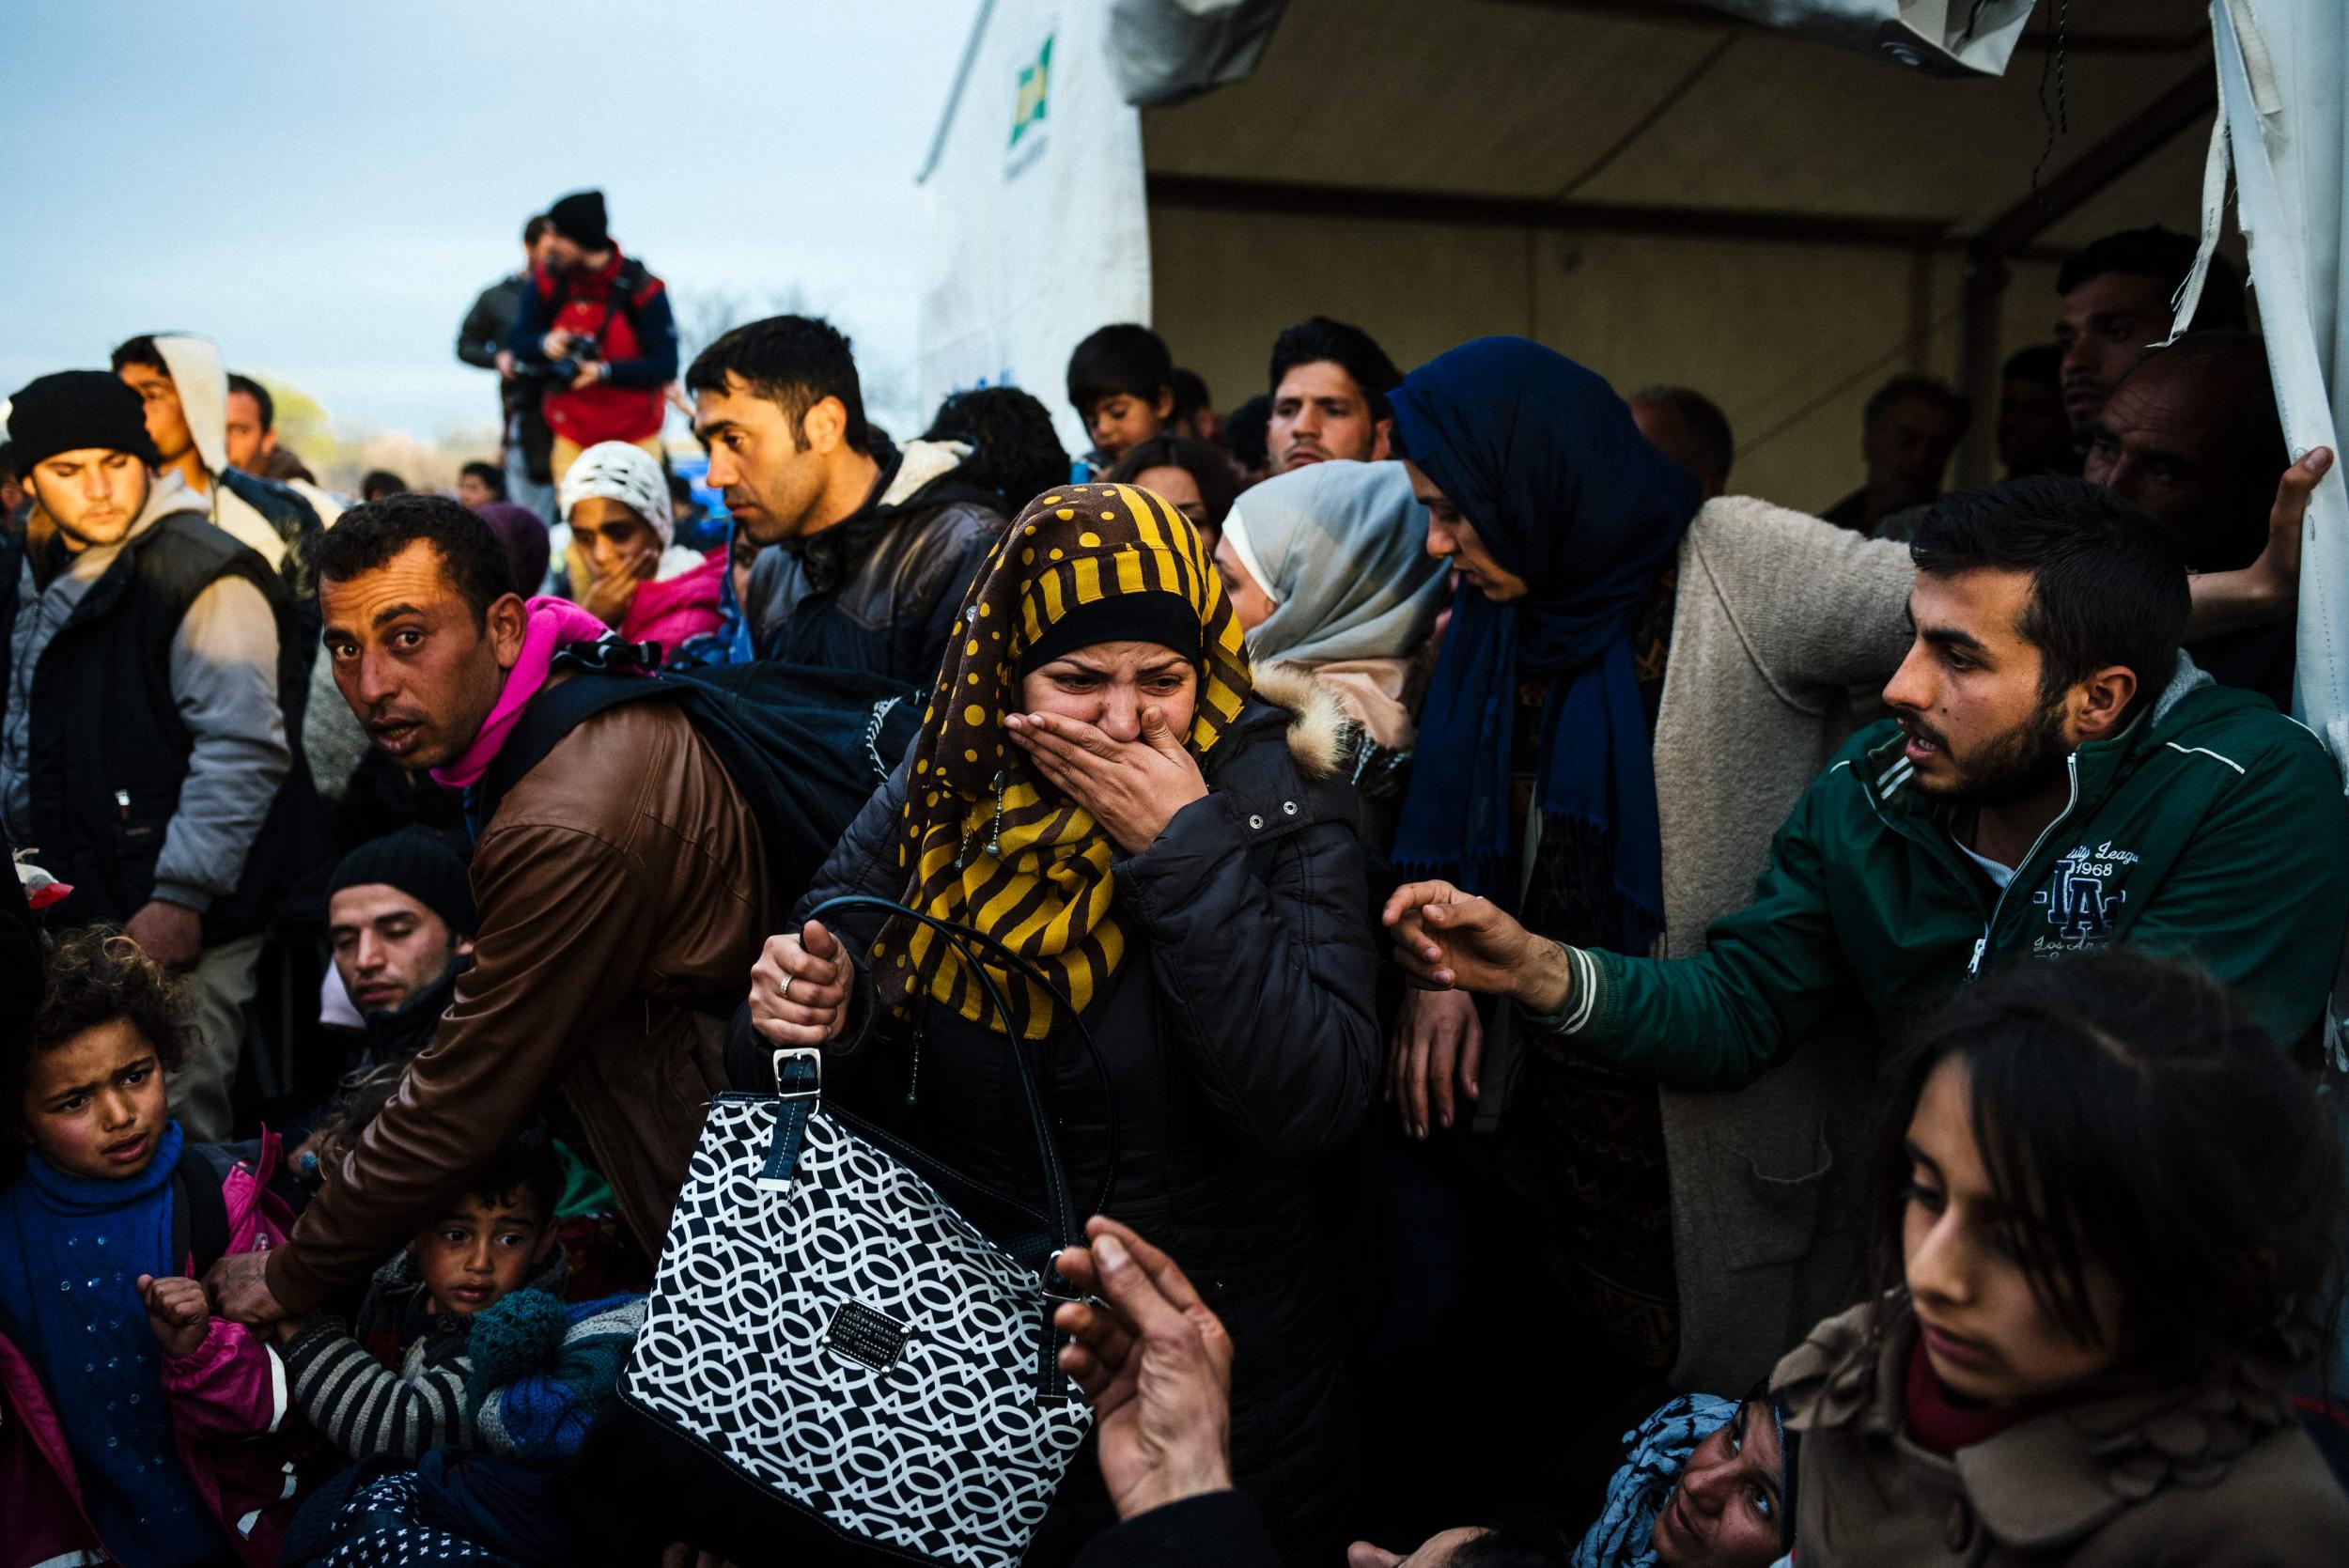 A woman reacts after losing sight of her child near the gate at the Greek-Macedonian border